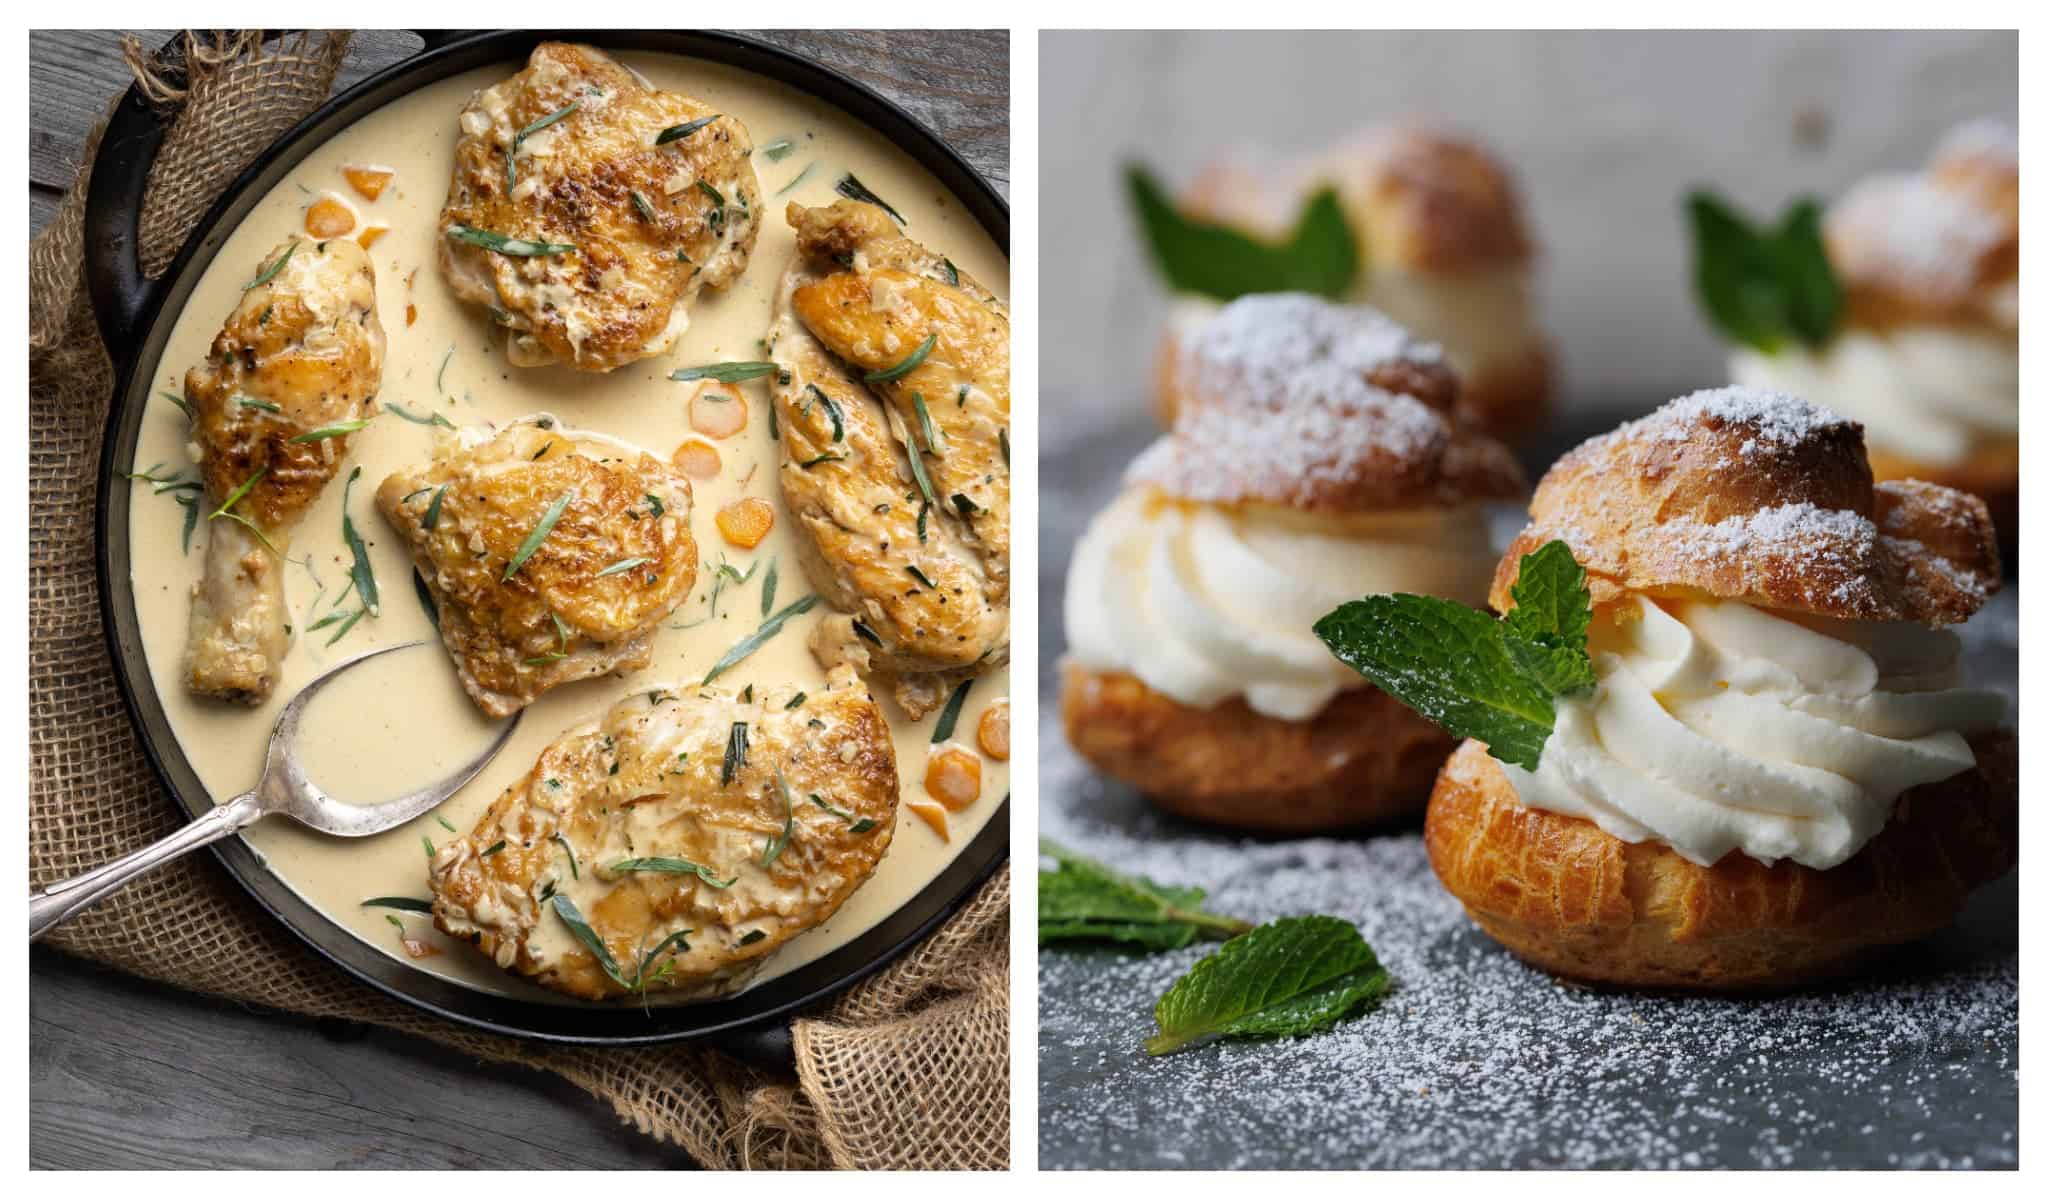 left: Creamy chicken in a cast iron skillet; right: choux pastry filled with crème chantilly, garnished with mint